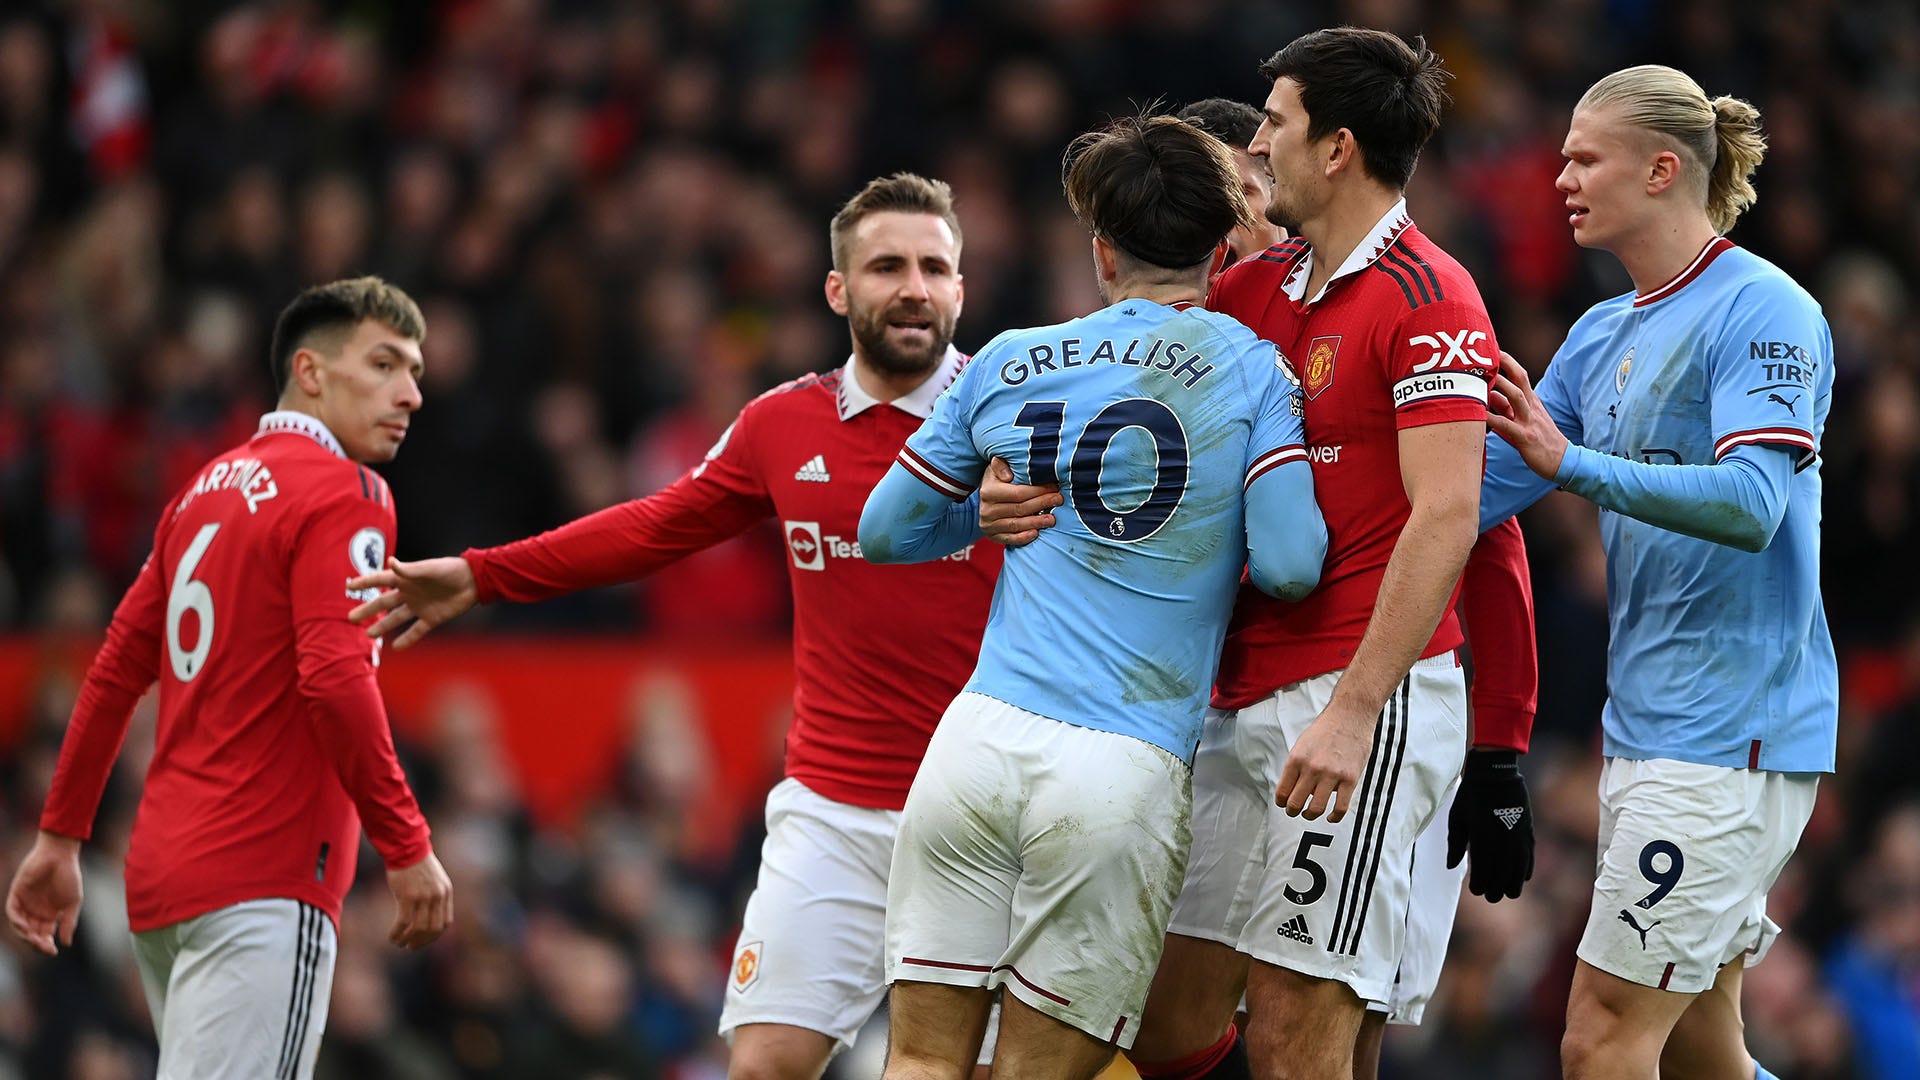 Explained: Why the Man Utd vs Man City FA Cup final kick-off time has